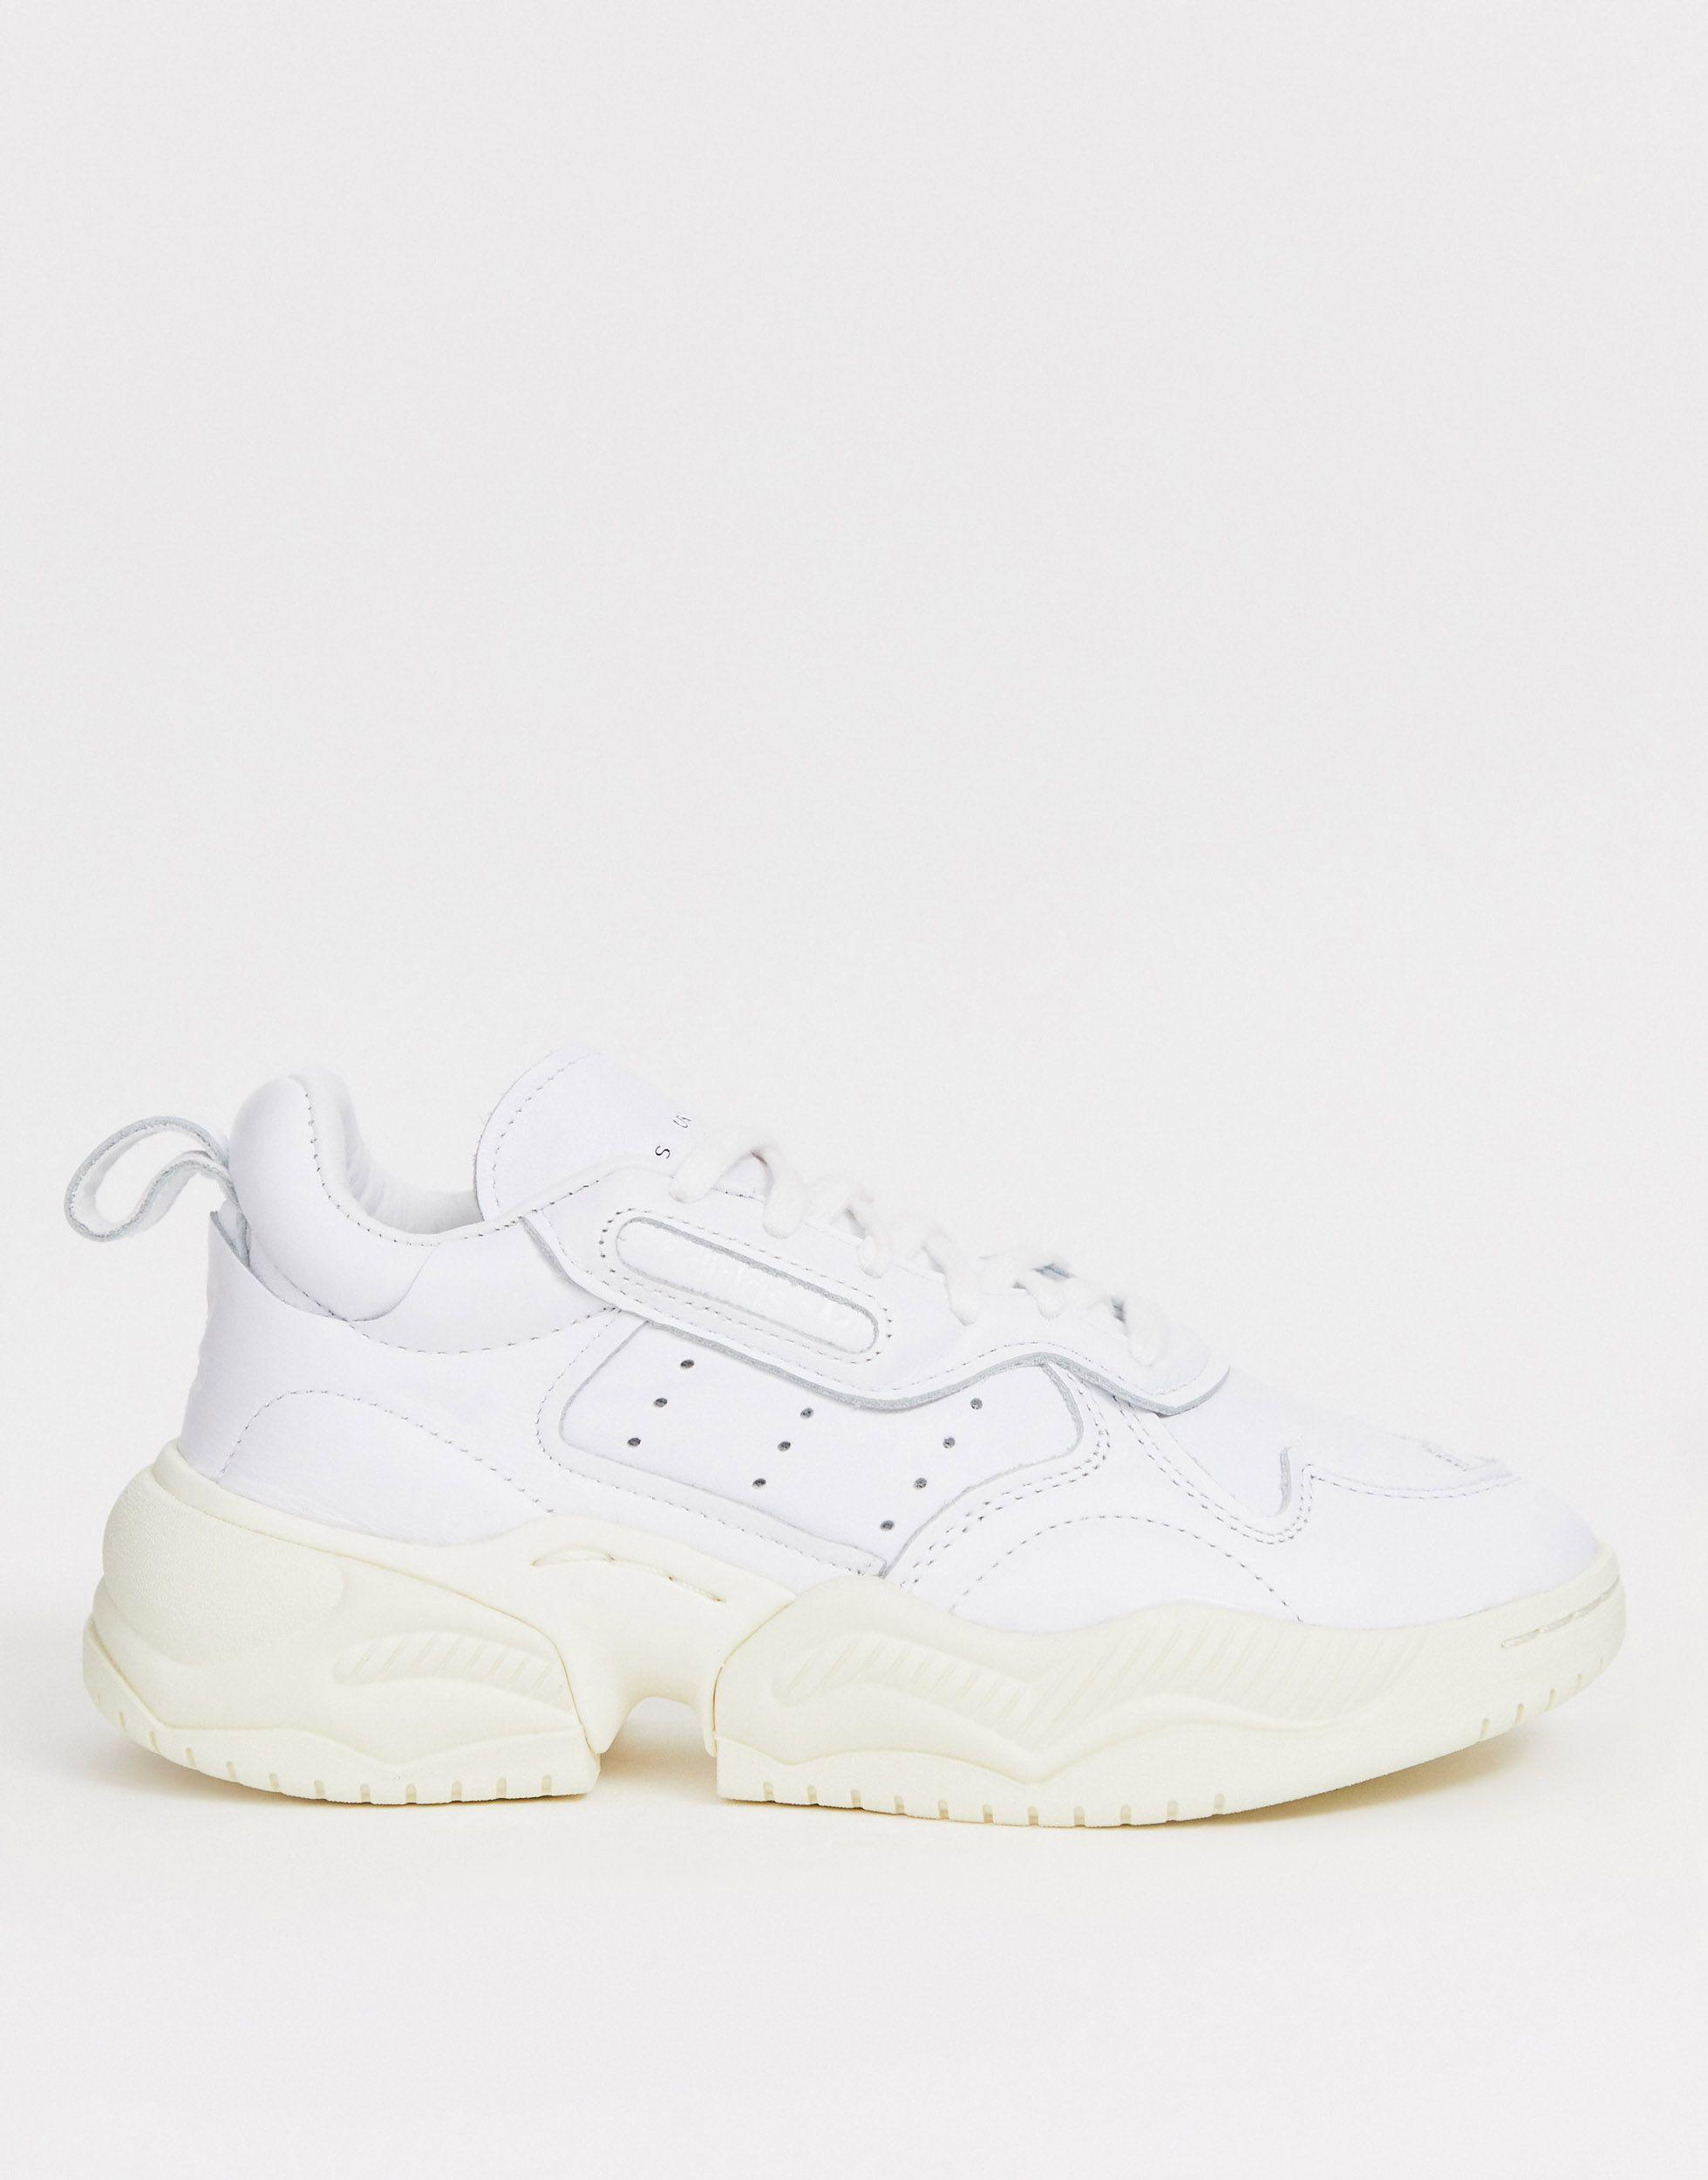 adidas Originals Leather Supercourt Rx Trainers In White - Lyst